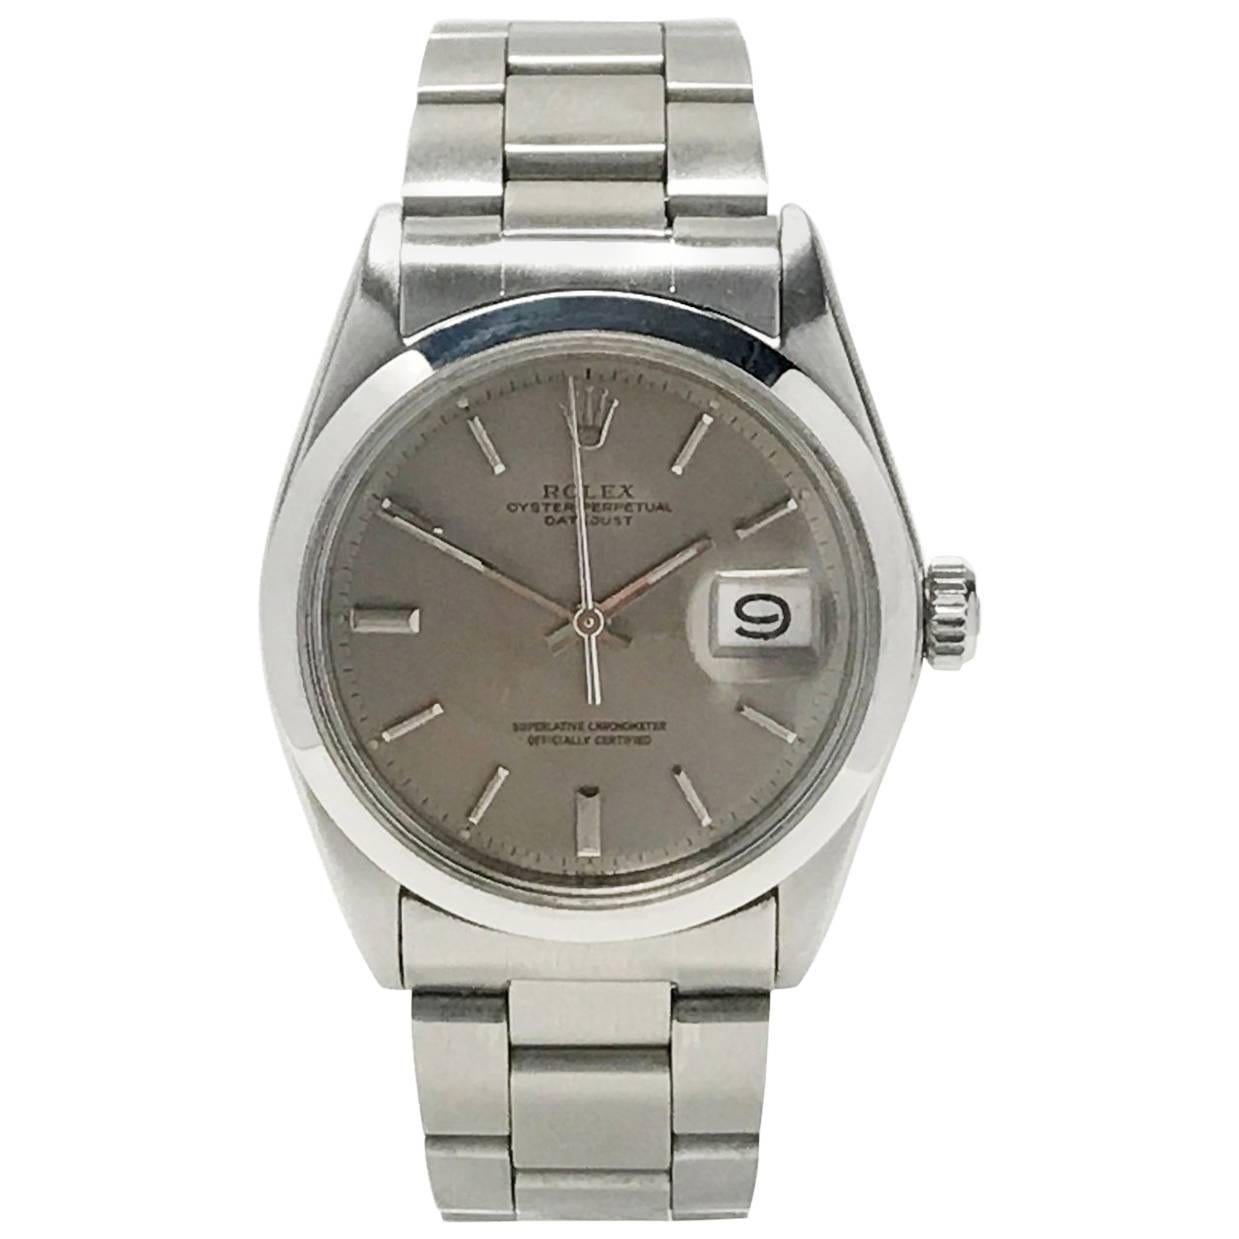 Vintage Men's Rolex Datejust Oyster Wristwatch Stainless Steel and Gray Dial